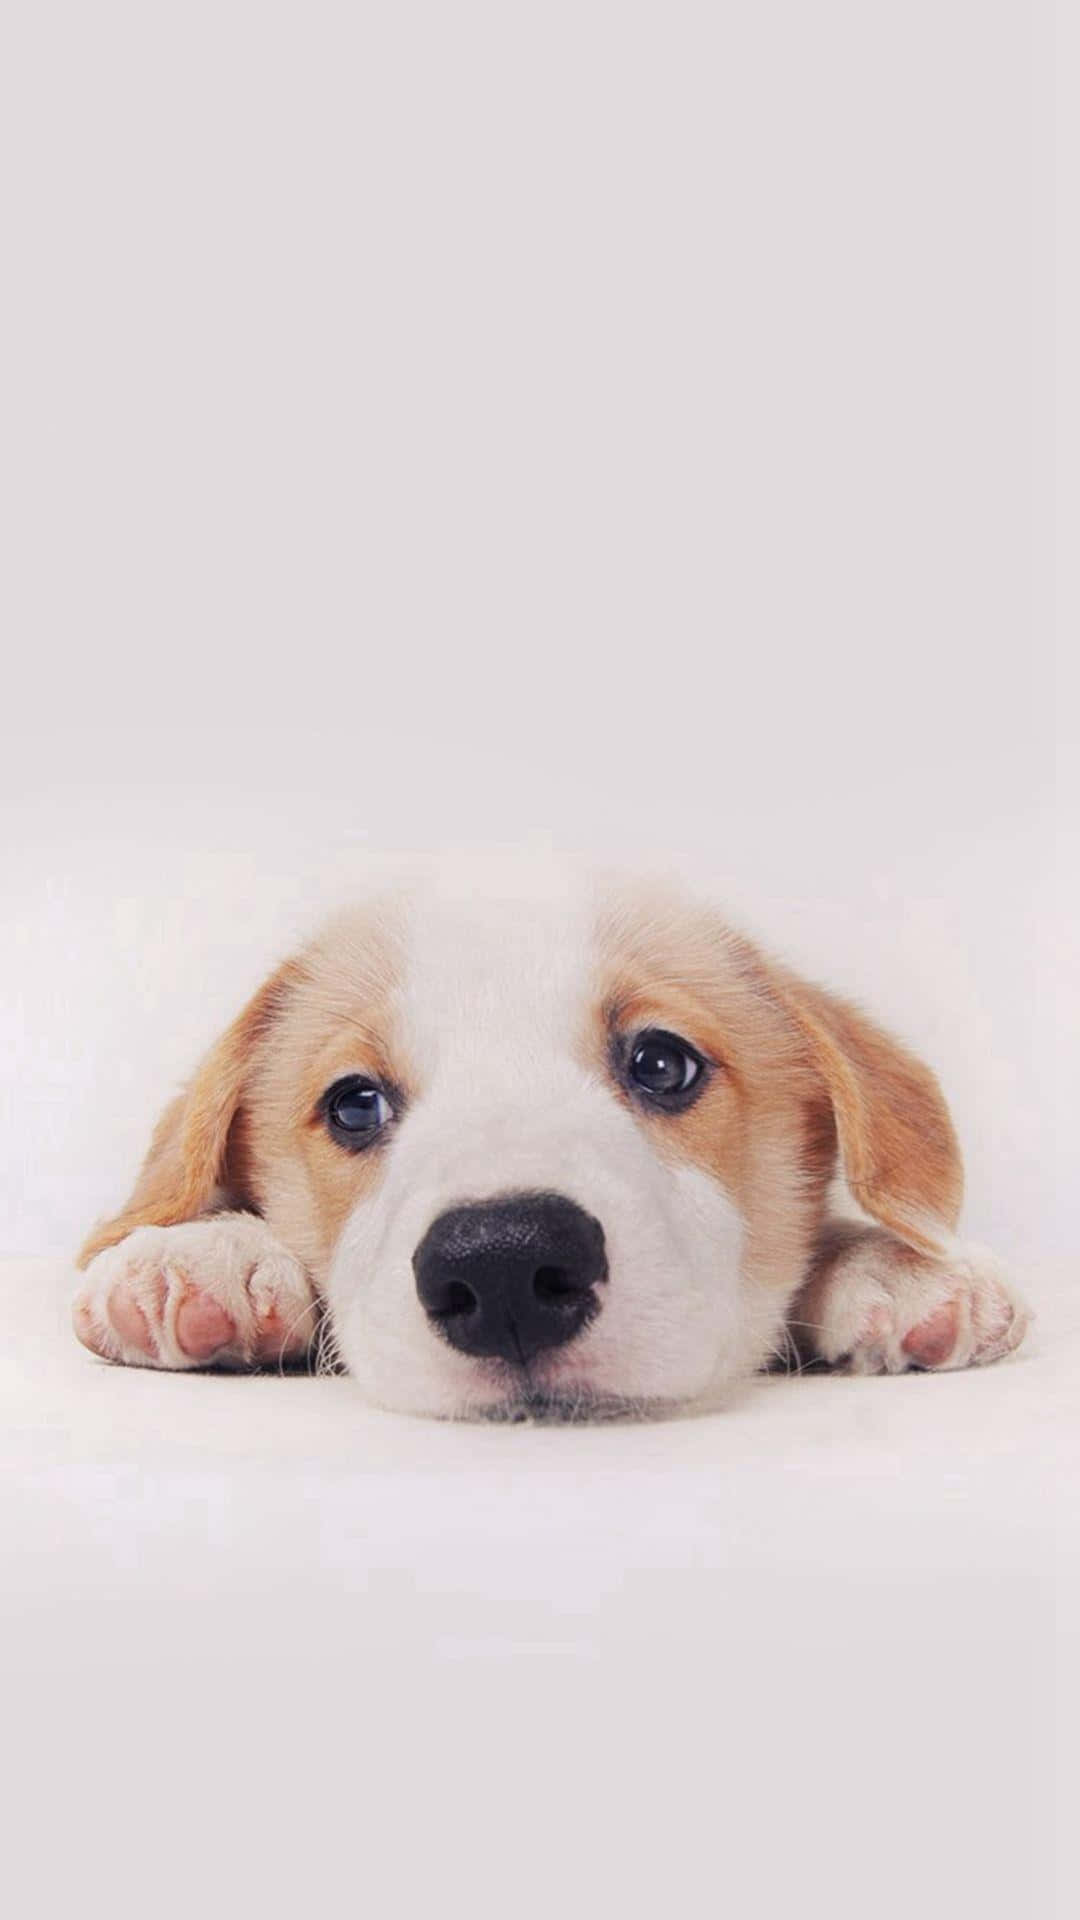 A Dog Is Laying Down On A White Background Wallpaper